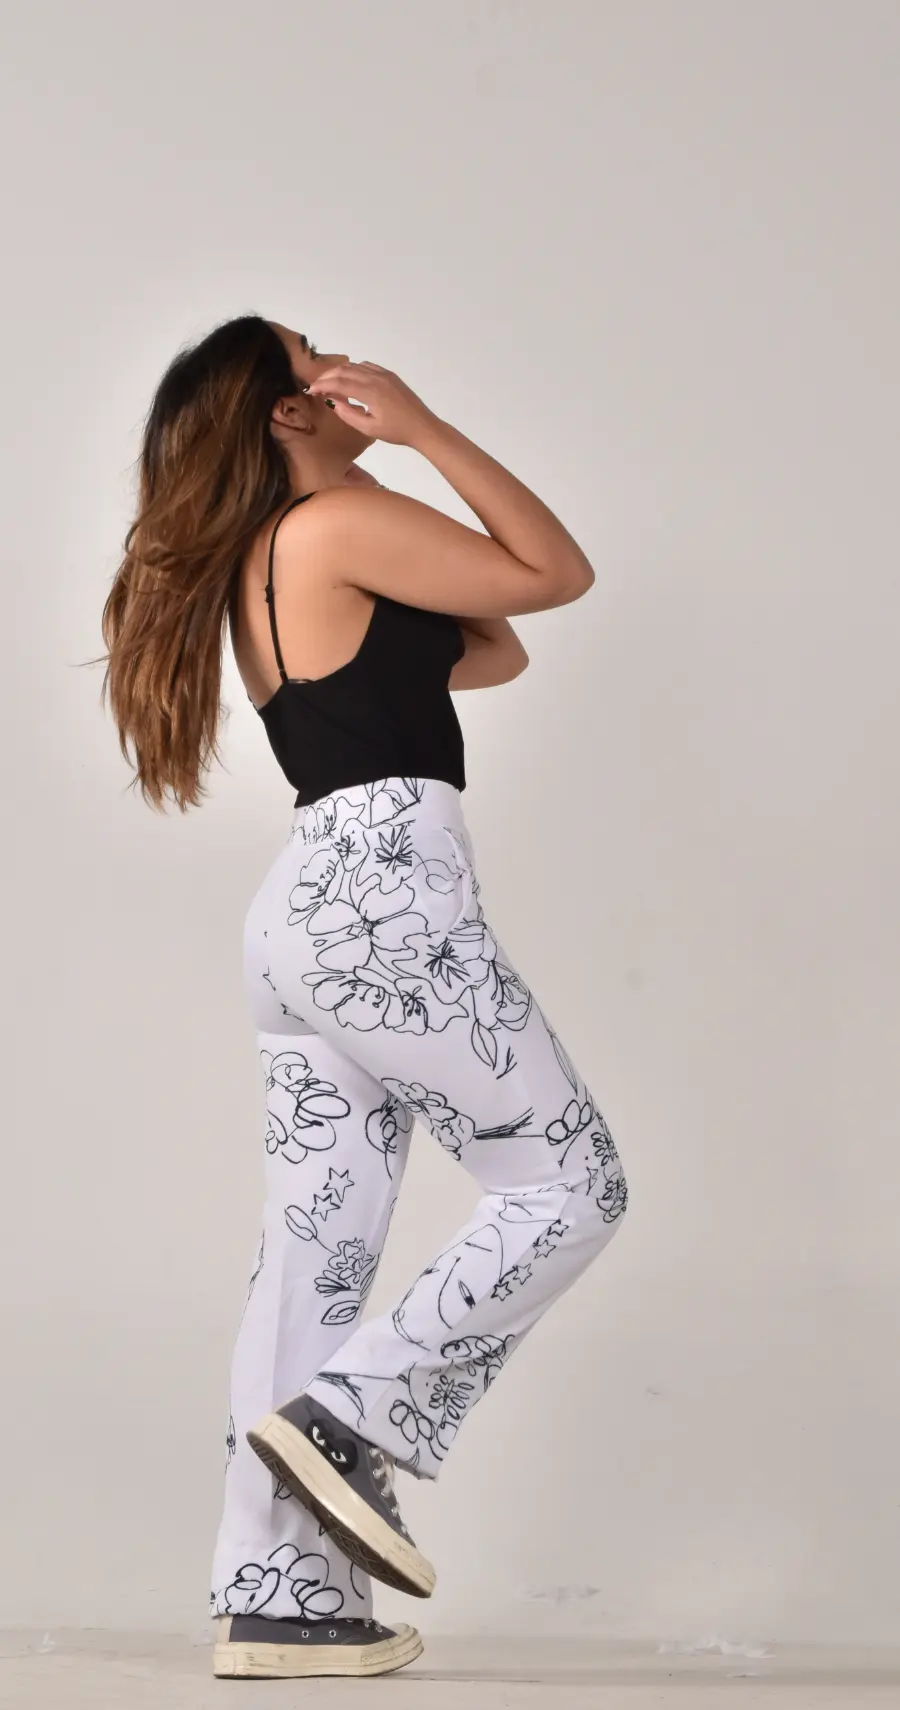 Side view of a woman wearing a black tank top and white yoga pants with simple black outlined floral print. She is brushing her hair back and looking up towards the ceiling.